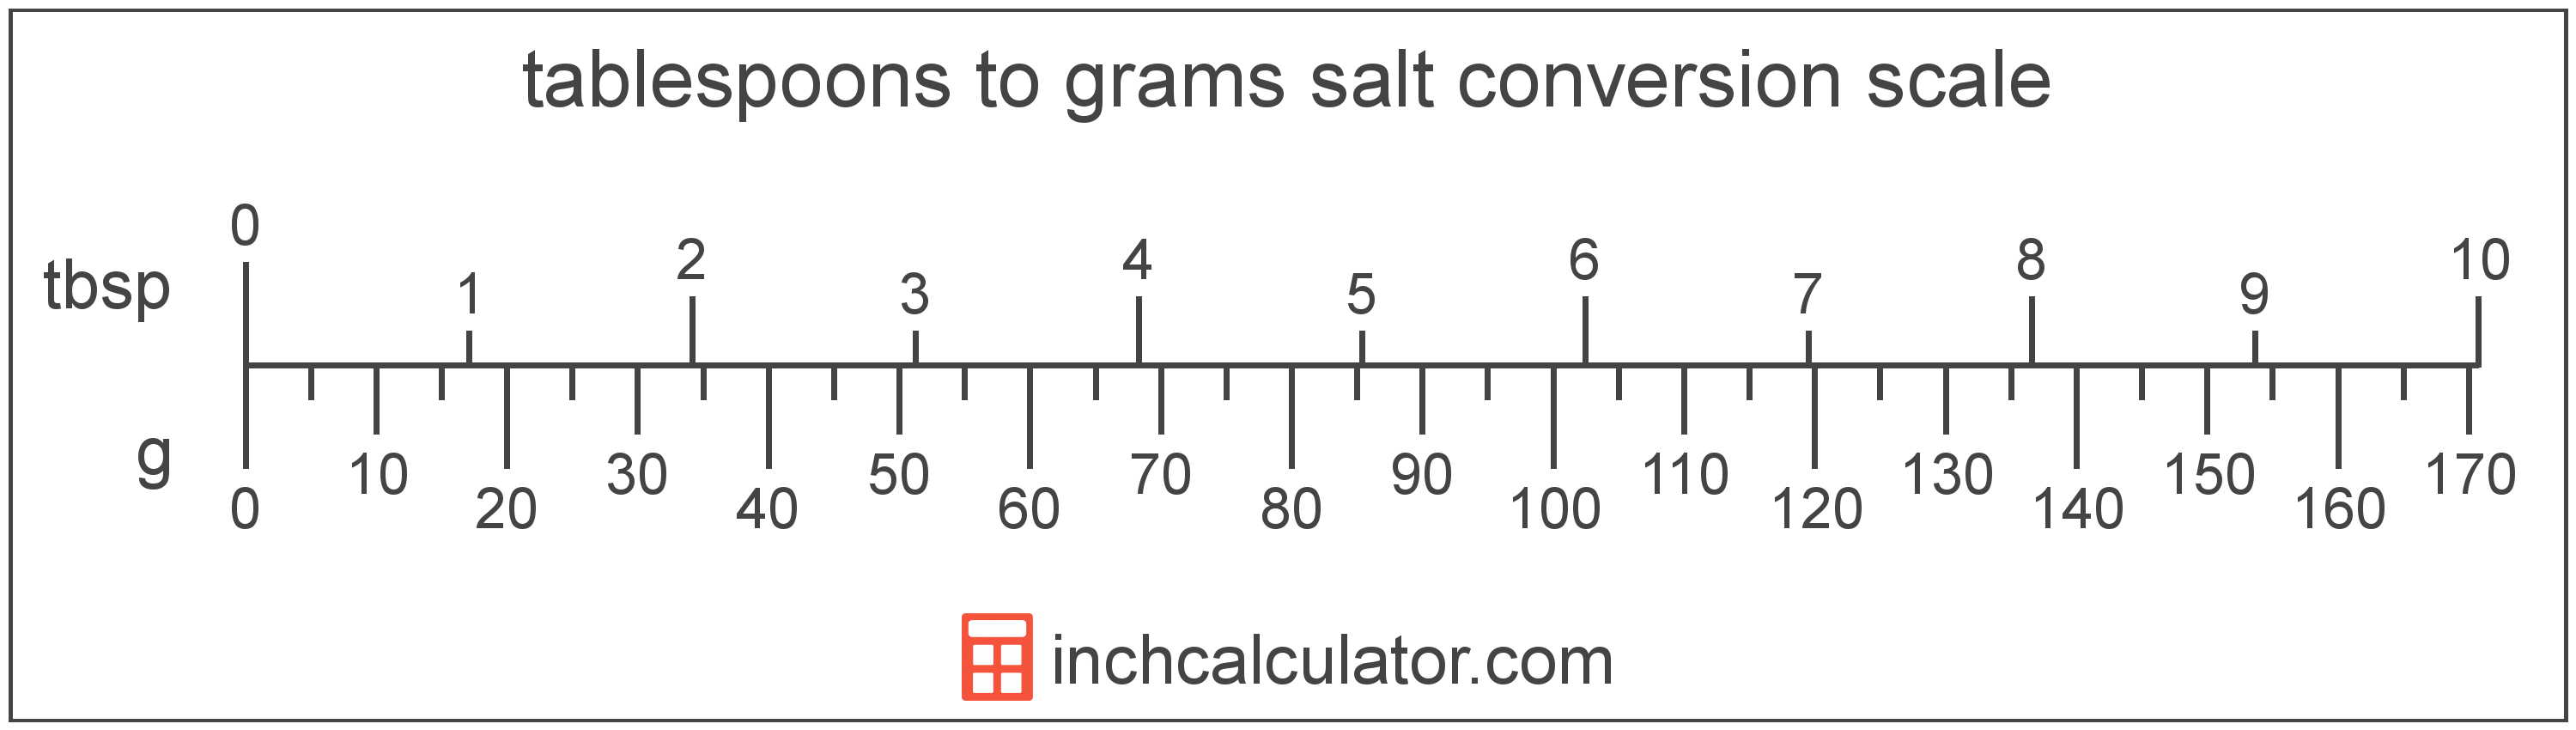 convert-grams-of-salt-to-tablespoons-g-to-tbsp